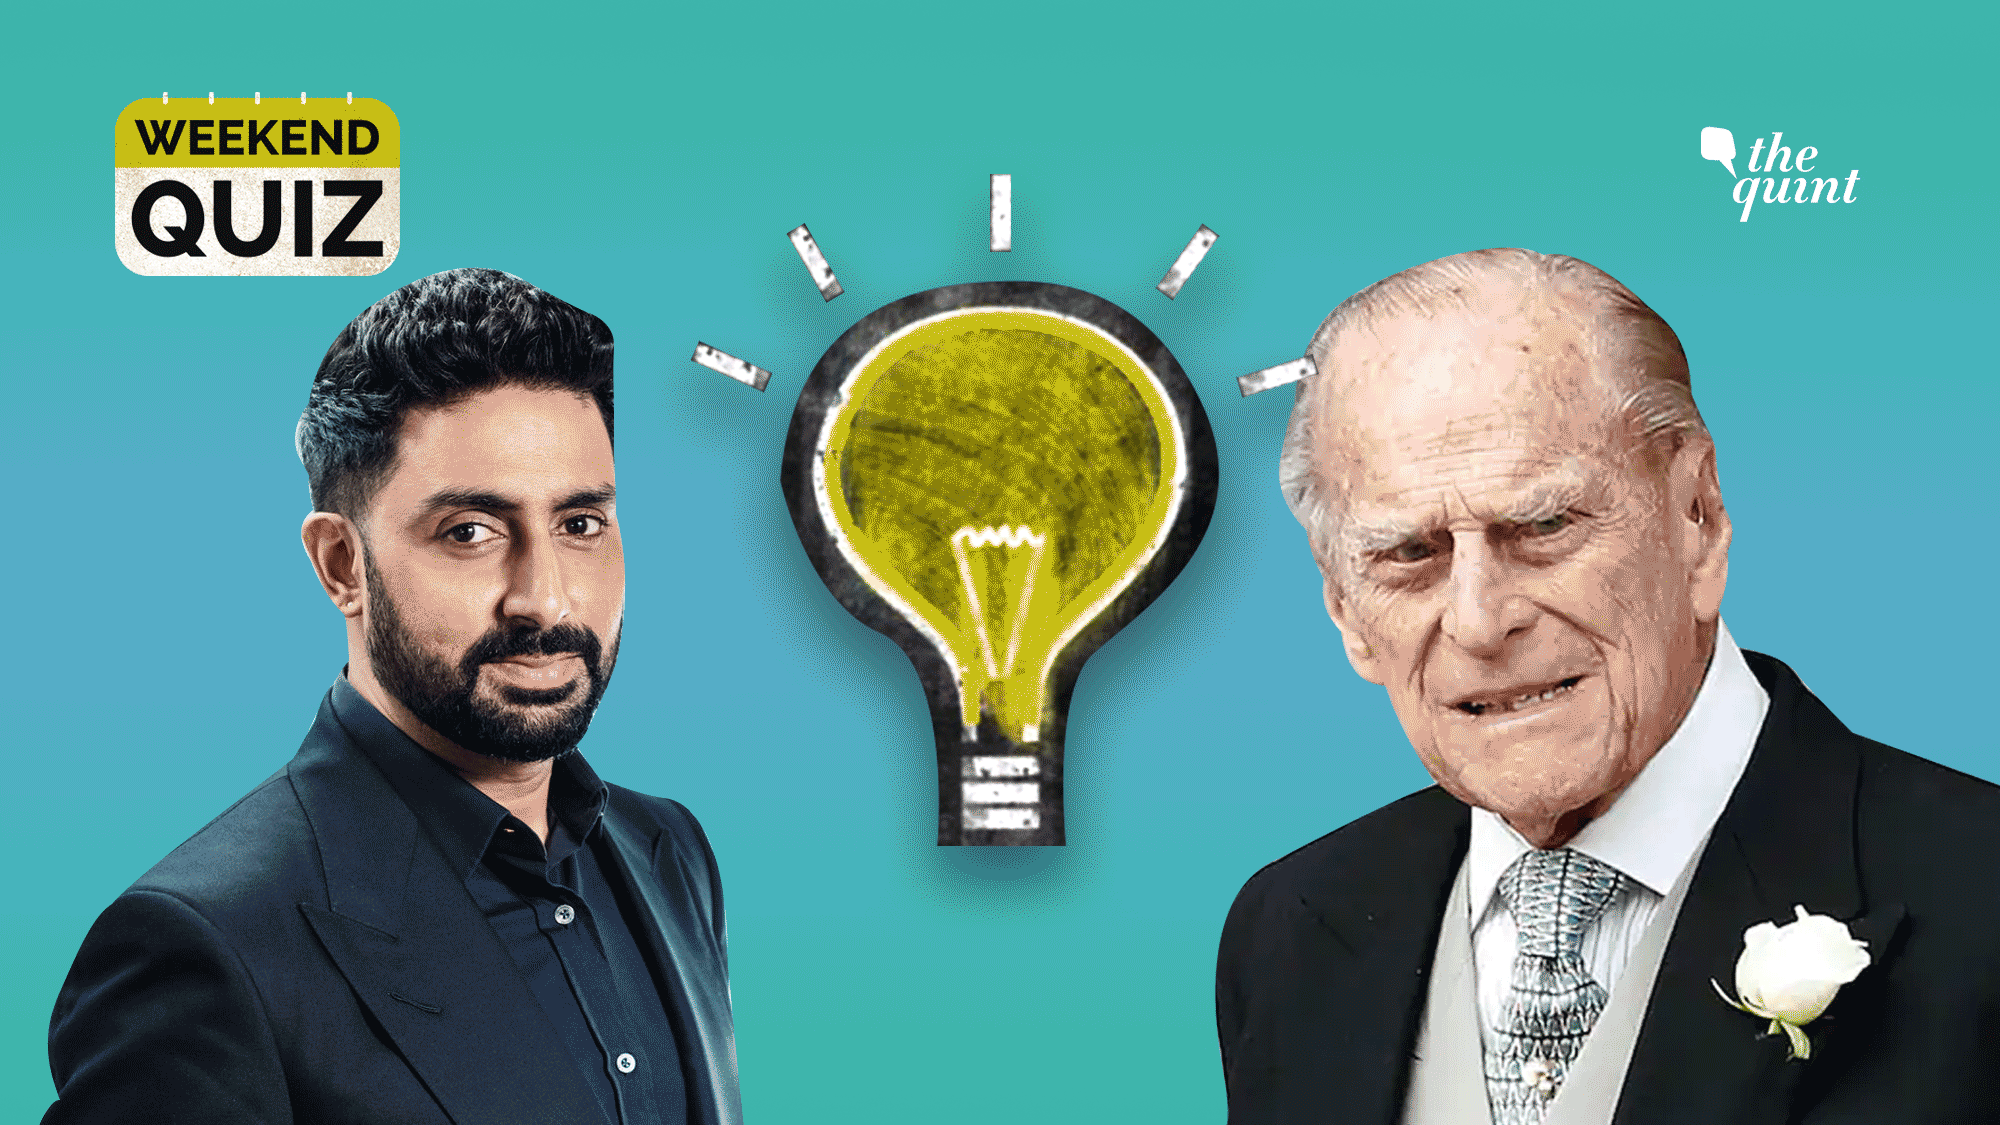 From Abhishek Bachchan’s latest release, Big Bull to the death of Prince Philip, have you been tracking the news this week?